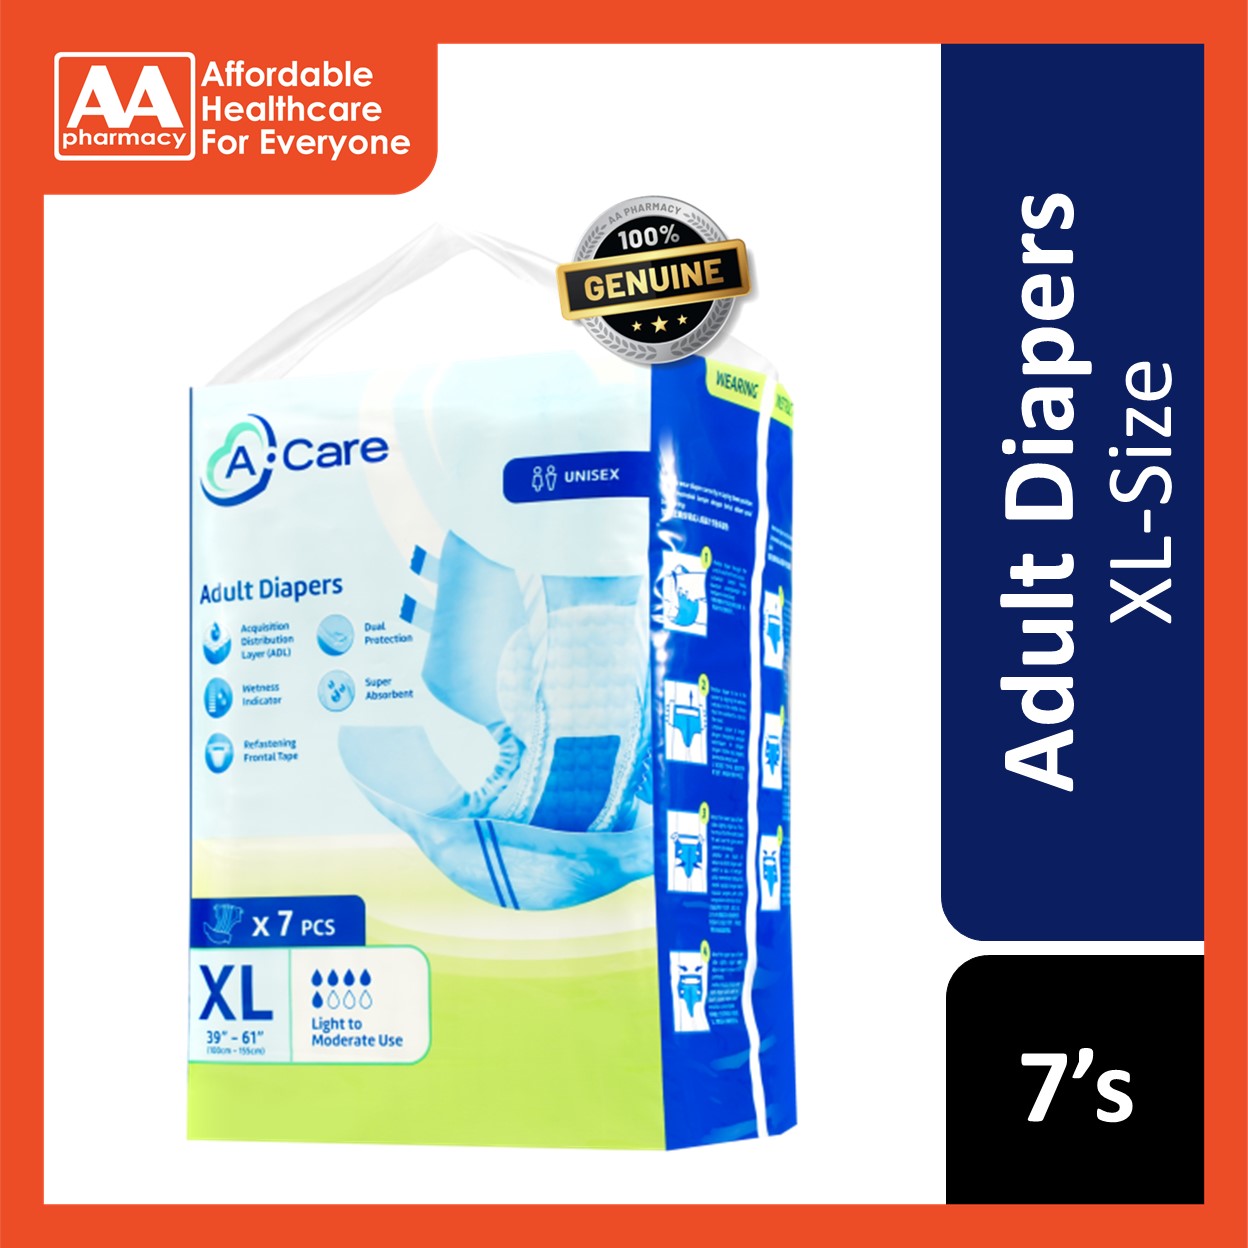 A-Care Adult Diapers Size XL 7's – AA Pharmacy